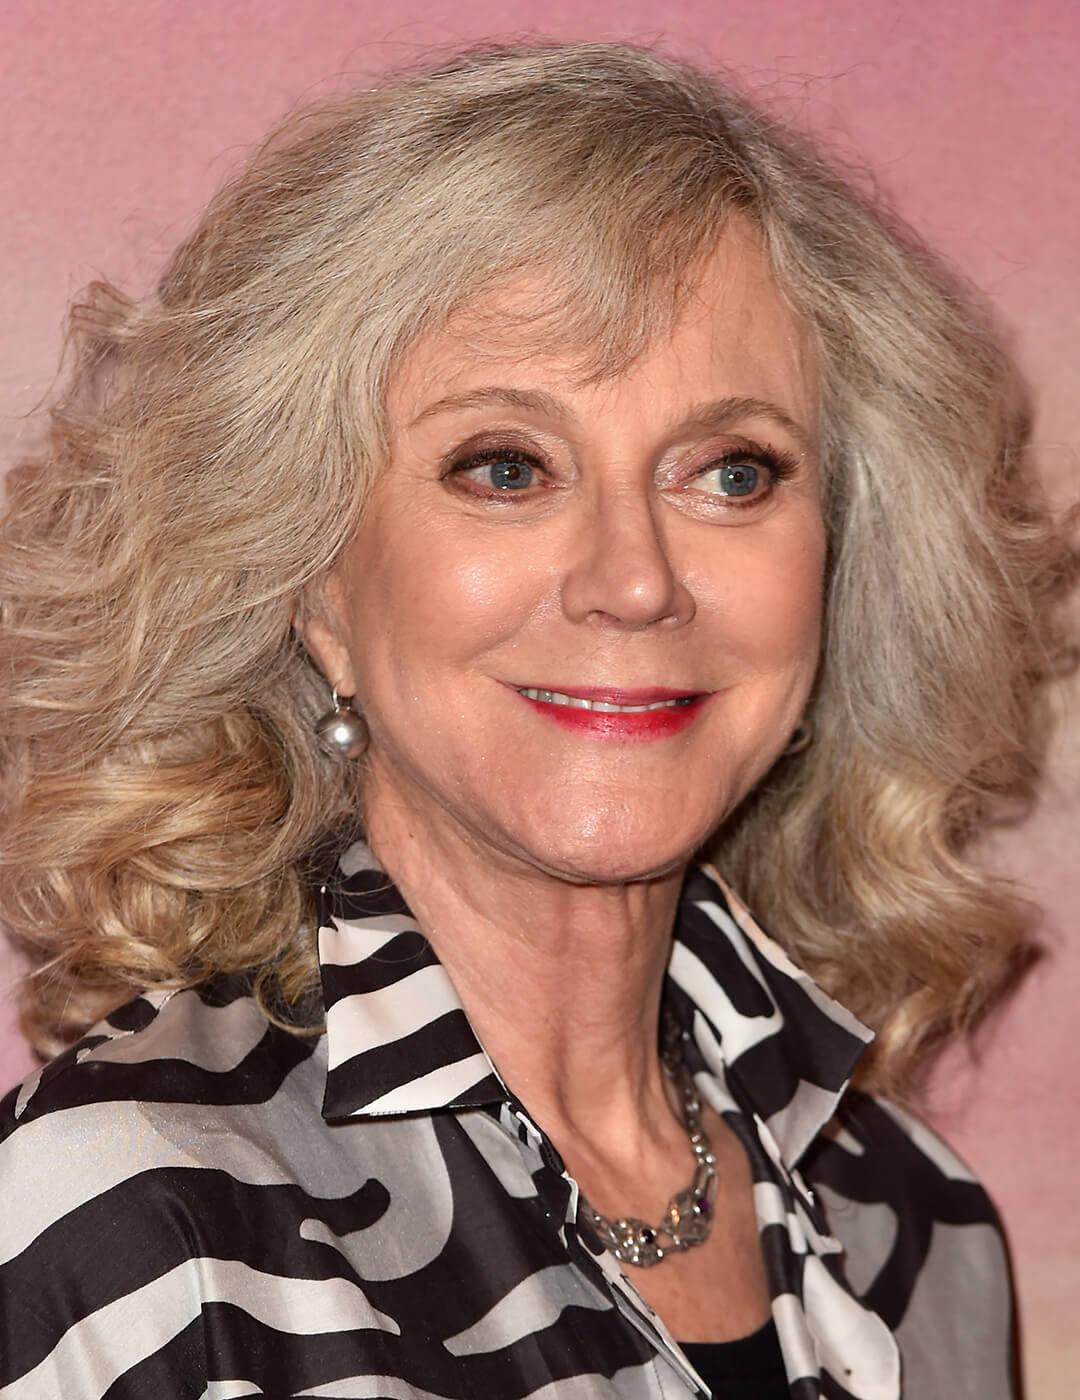 A photo of Blythe Danner with natural beachy waves hairstyle